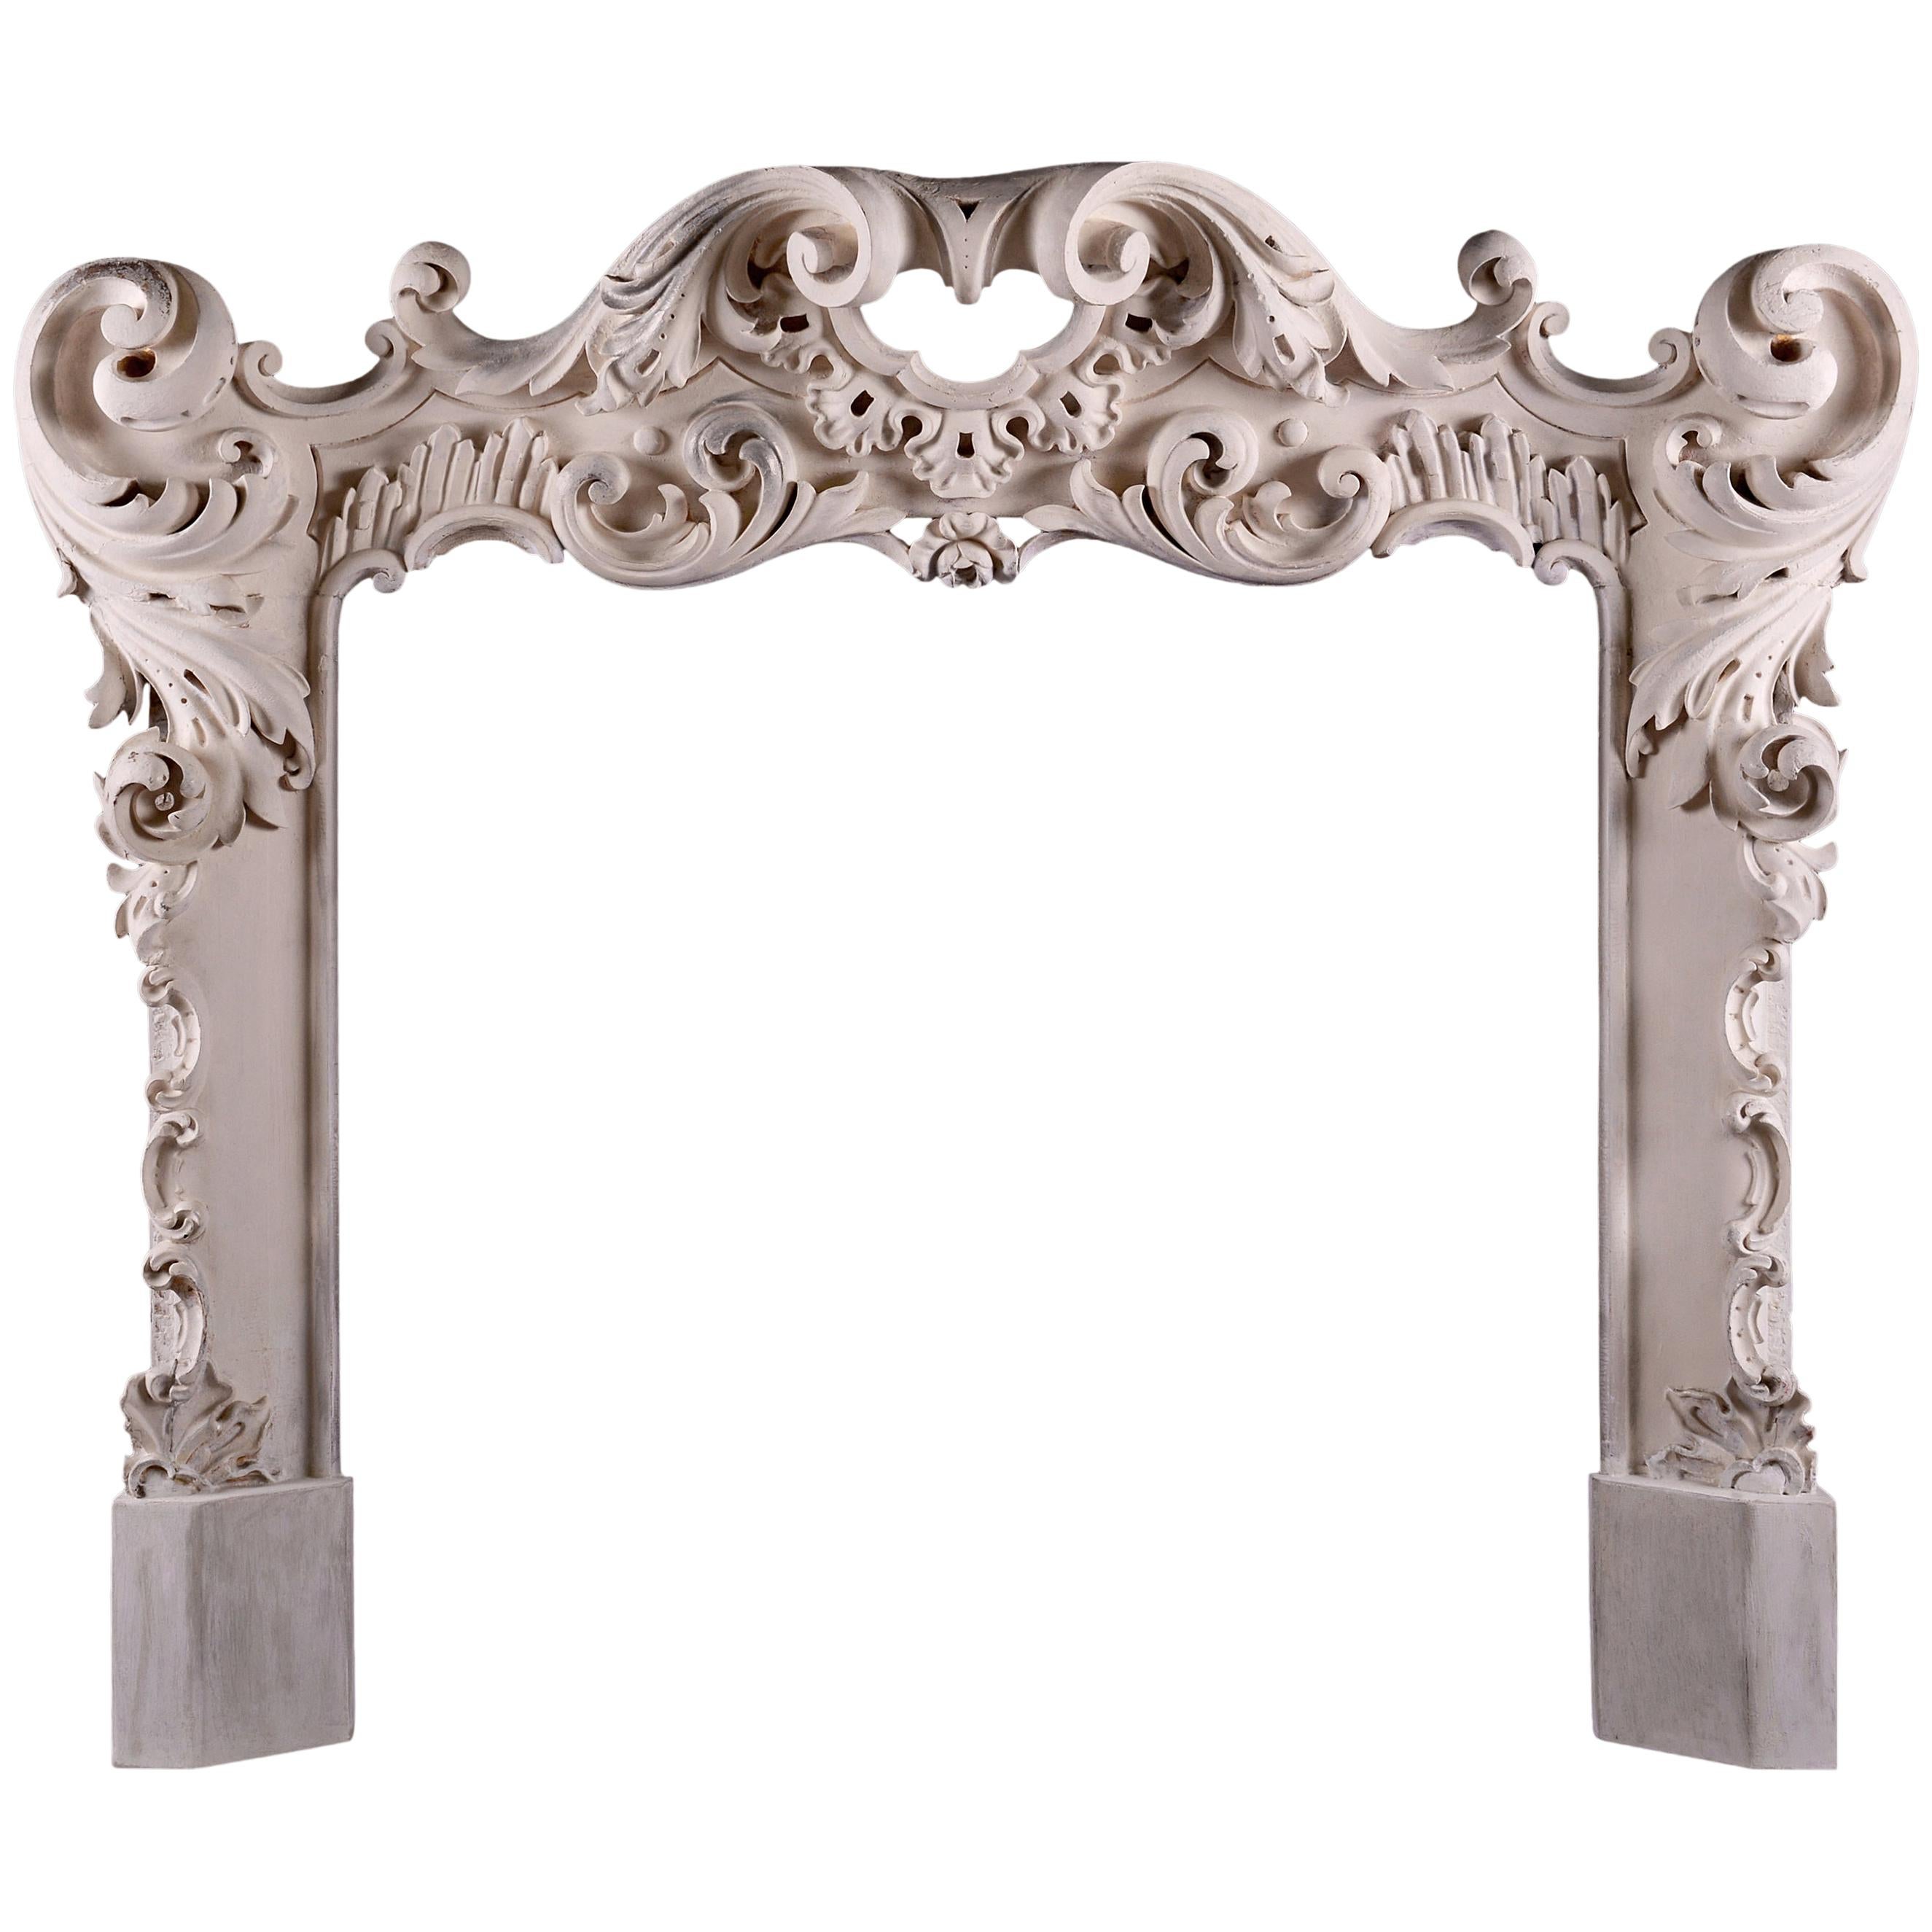 Highly Decorative Rococo Timber Fireplace For Sale